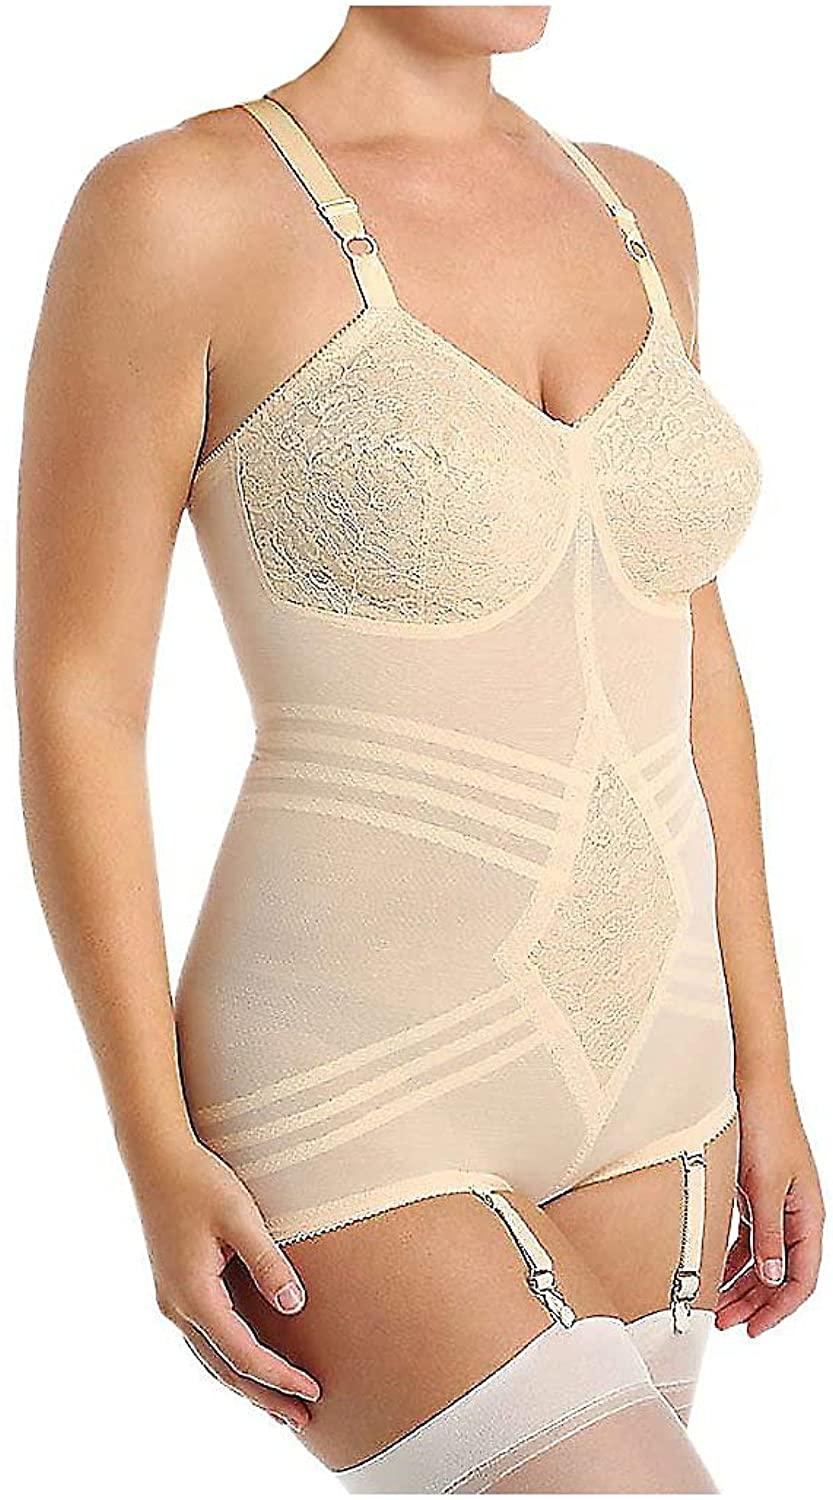 Nude Panty Girdle Firm Shaping